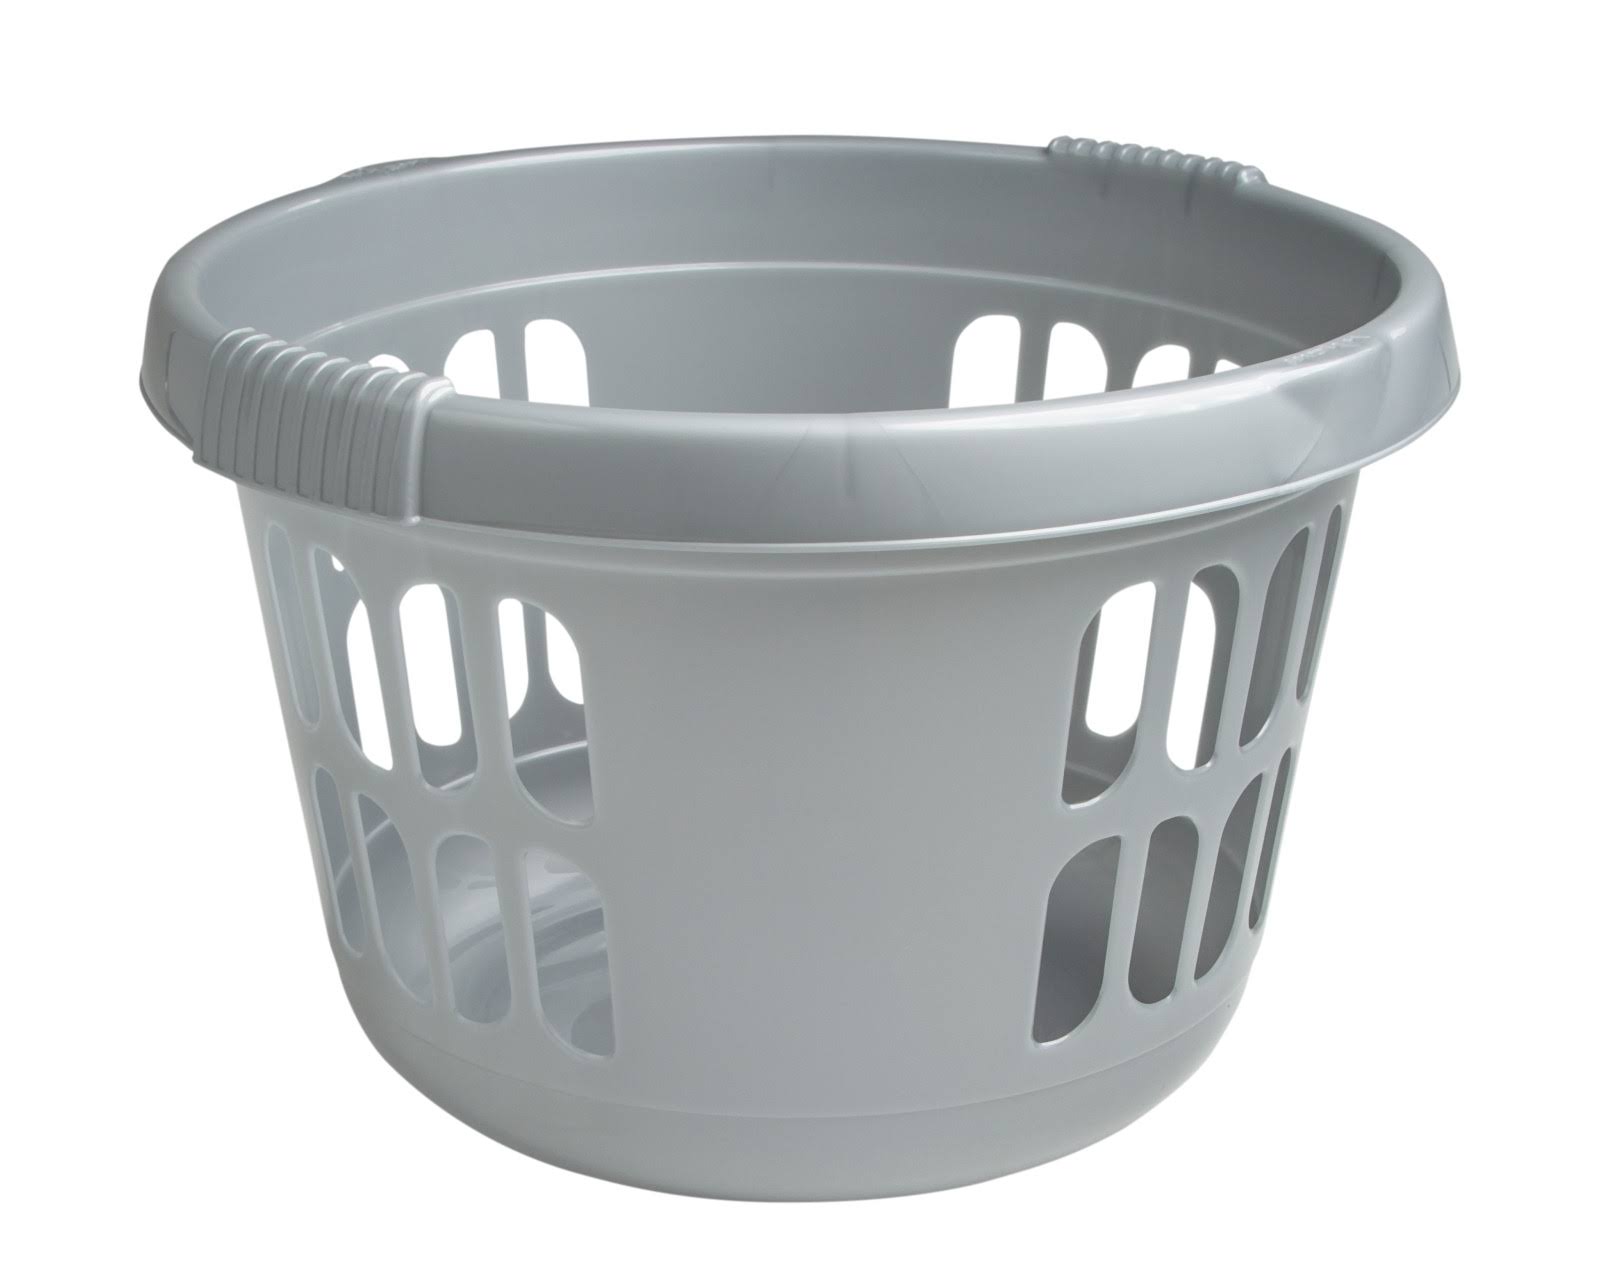 Deluxe Round Laundry Basket New Silver Made in UK | Storage & Organisation | Delivery guaranteed | Free Shipping On All Orders